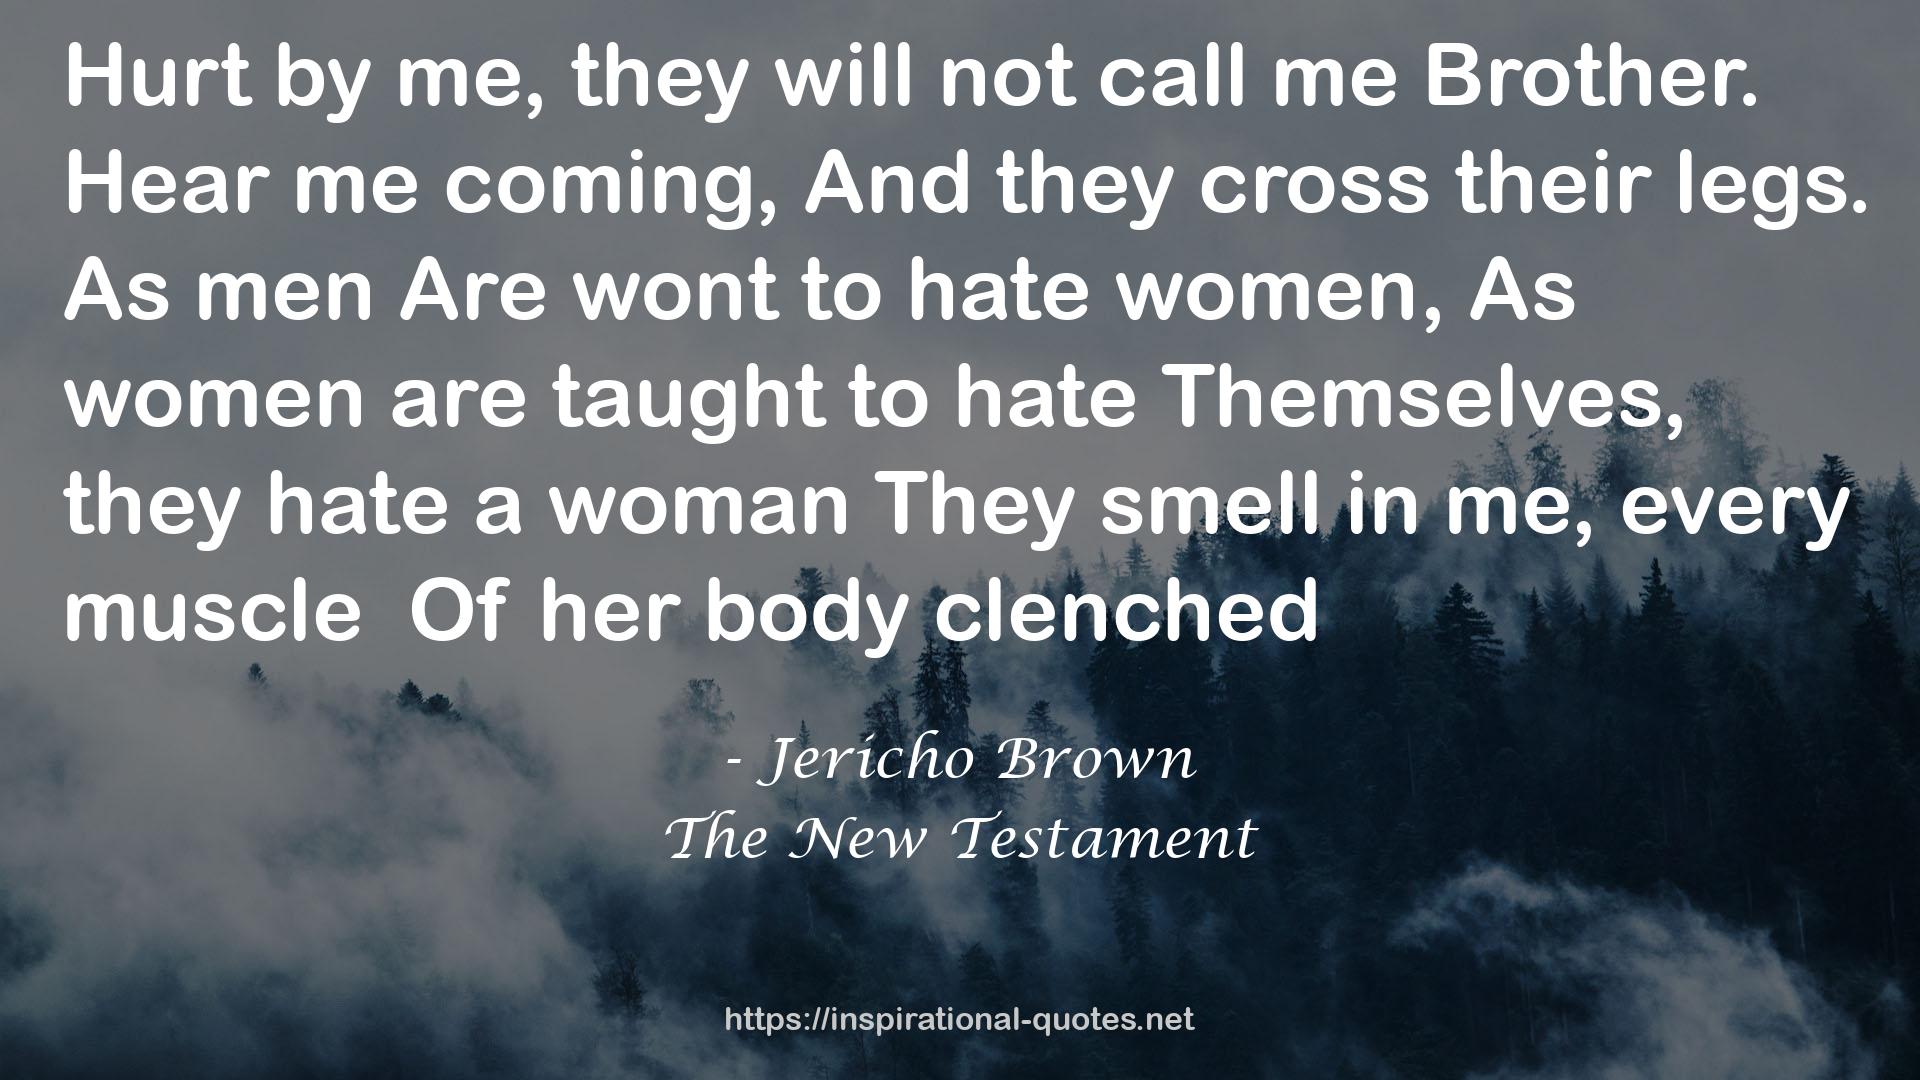 The New Testament QUOTES